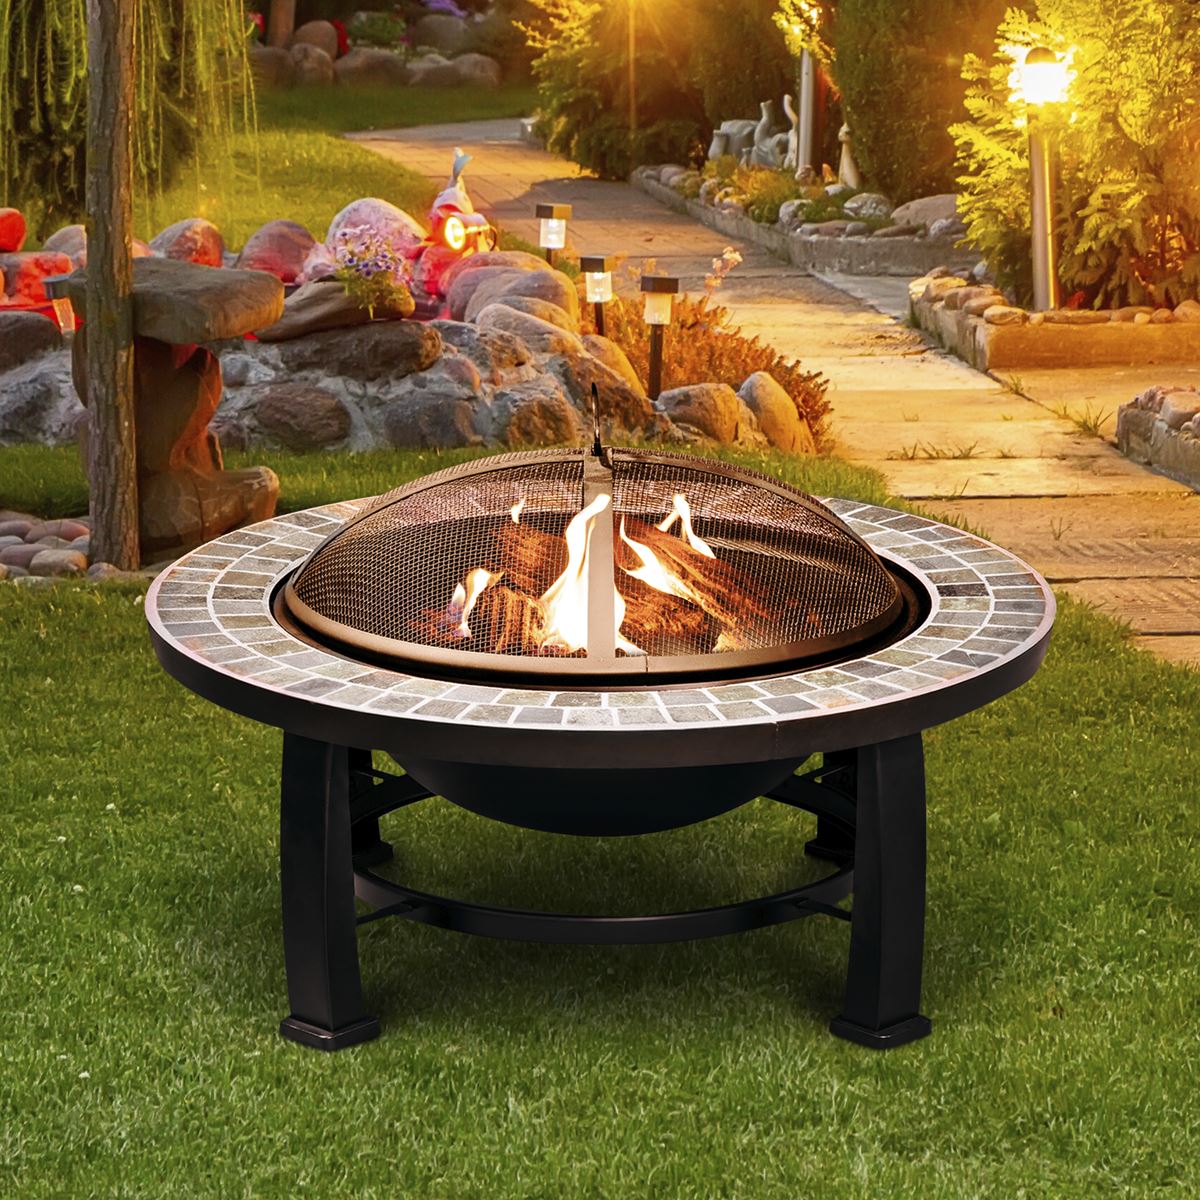 Dellonda 30" Deluxe Traditional Style Fire Pit/Fireplace/Outdoor Heater - Slate